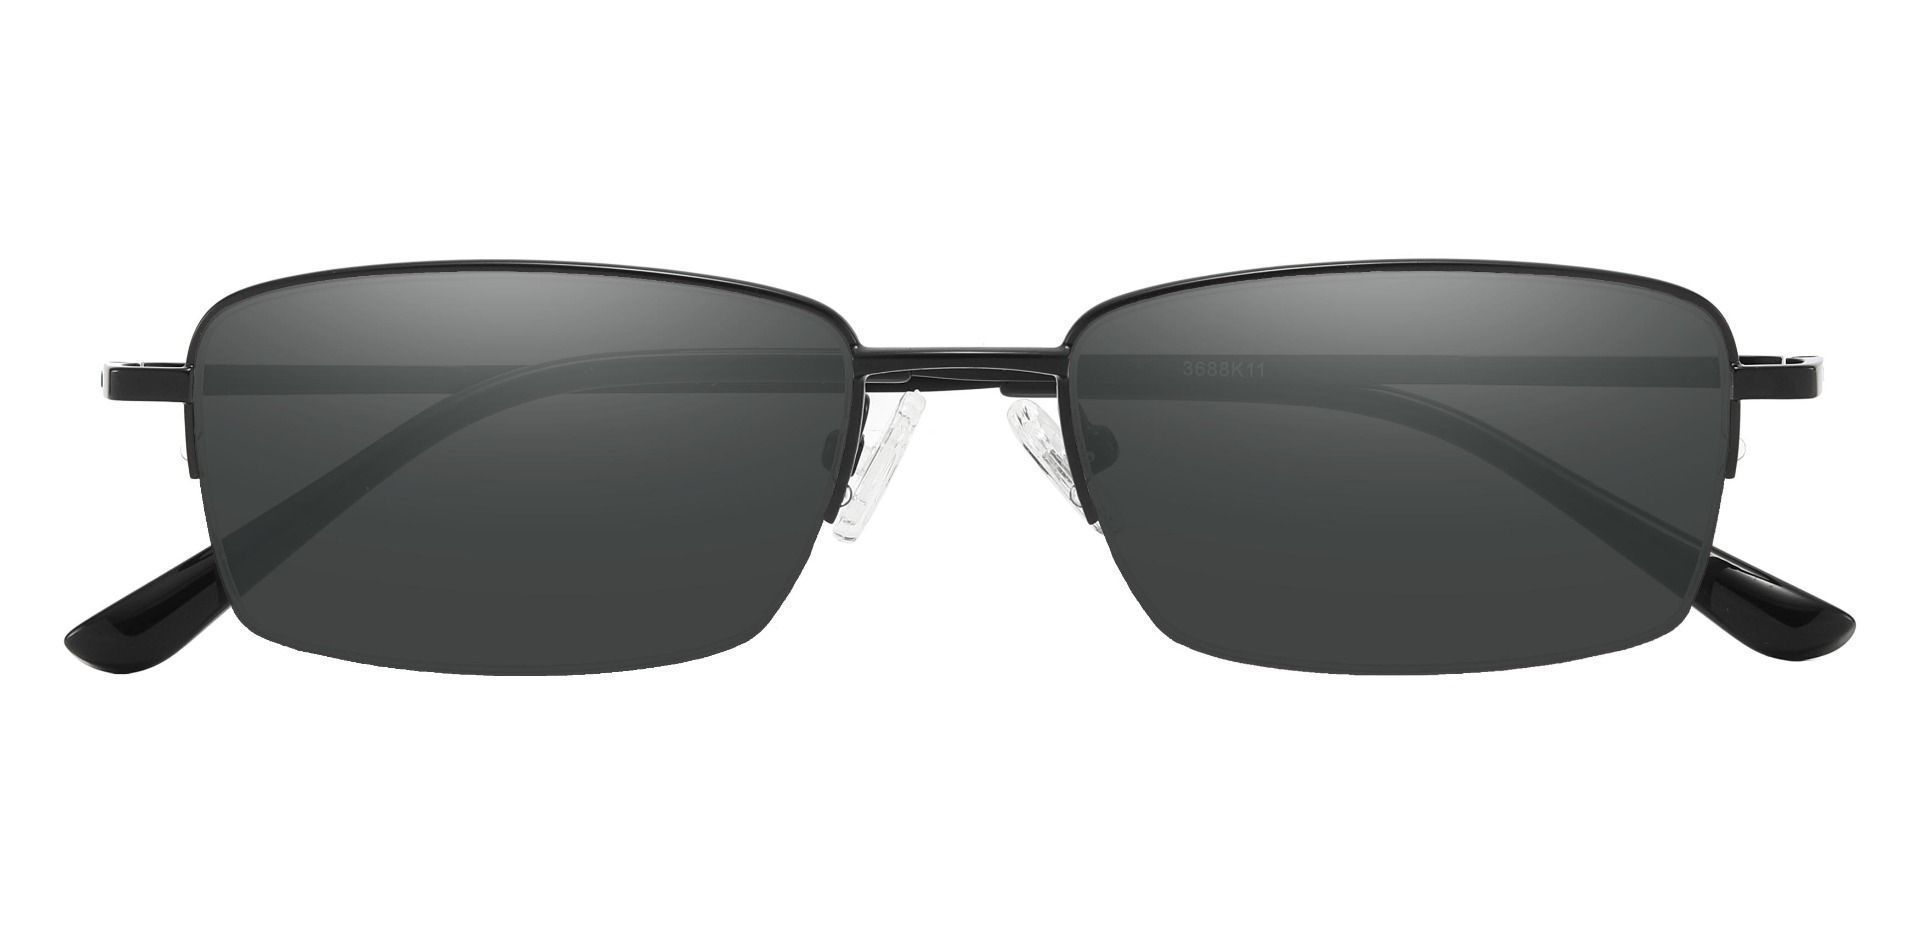 Milford Rectangle Non-Rx Sunglasses - Black Frame With Gray Lenses